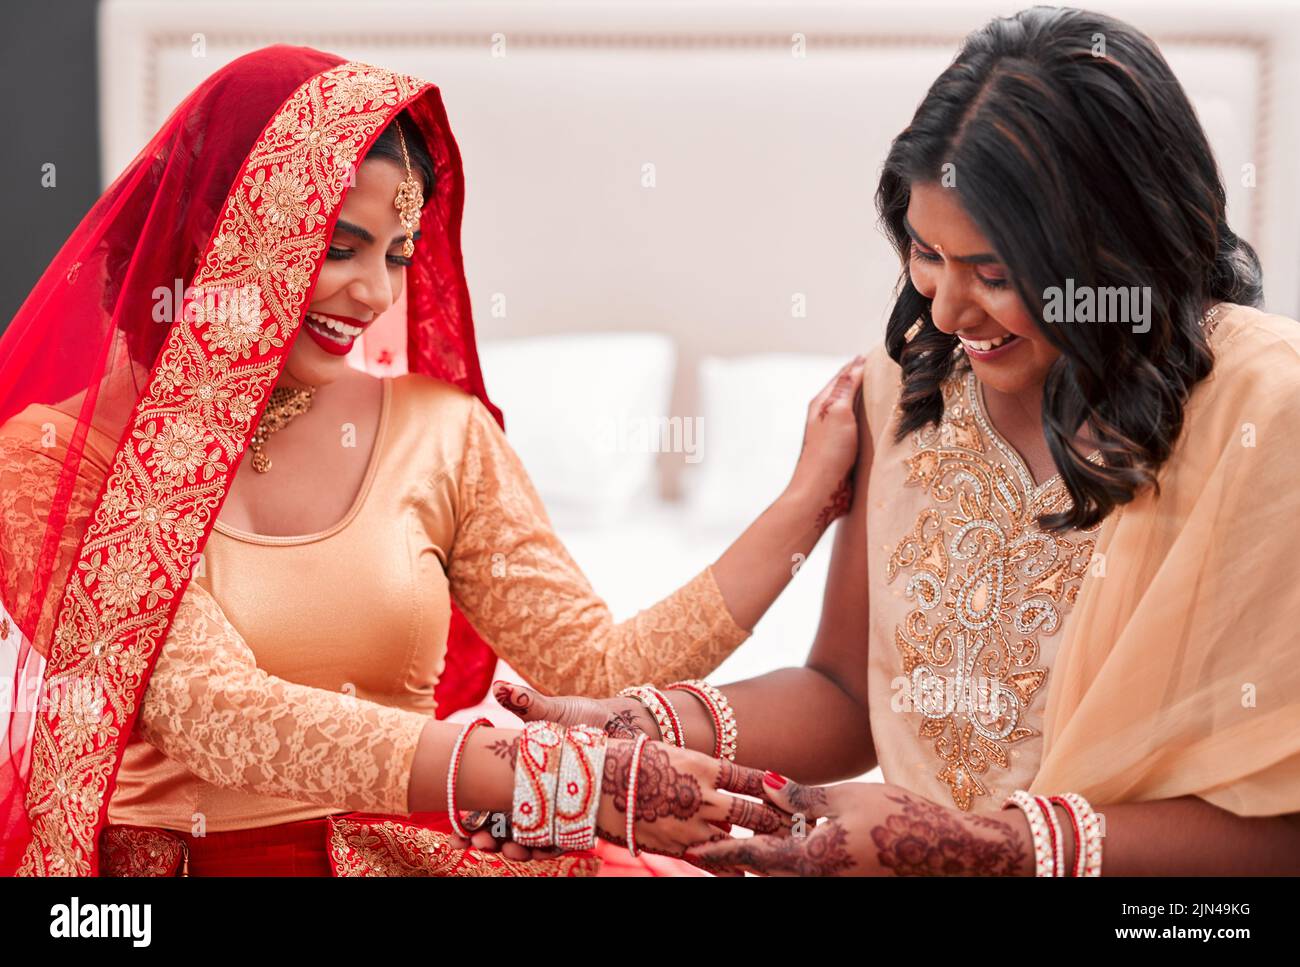 These are just perfect. a young woman getting her bracelets put on by her bridesmaid on her wedding day. Stock Photo